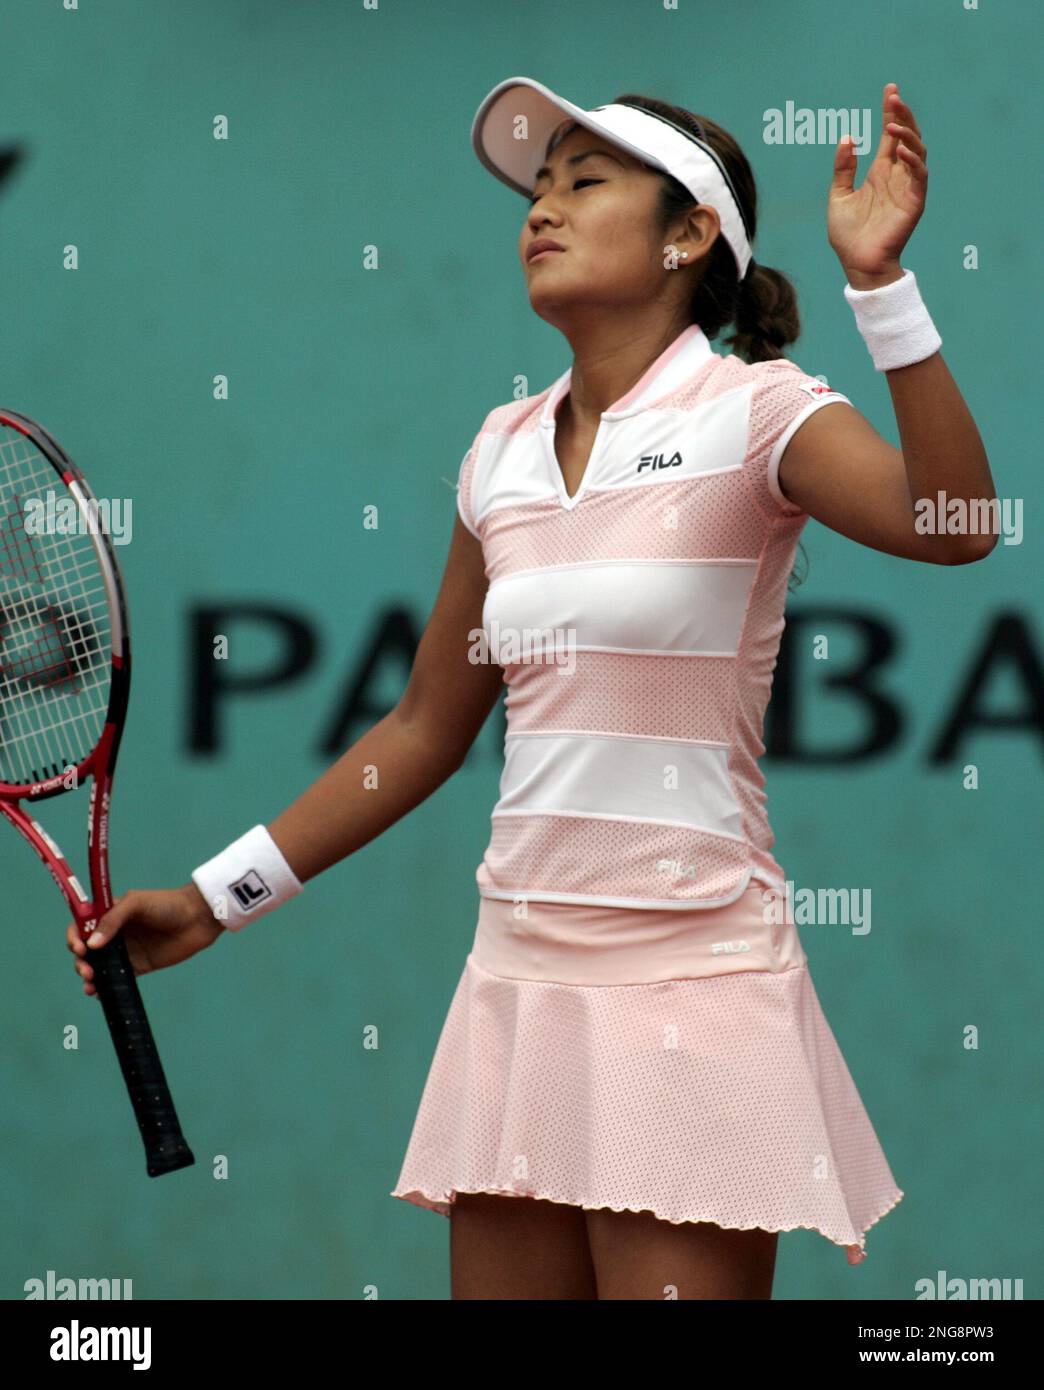 Japan's Akiko Morigami reacts after losing a second round match against U.S. player Shenay Perry during the French Open tennis tournament at the Roland Garros stadium in Paris, Thursday June 1, 2006. (AP Photo/Michel Euler) Stock Photo